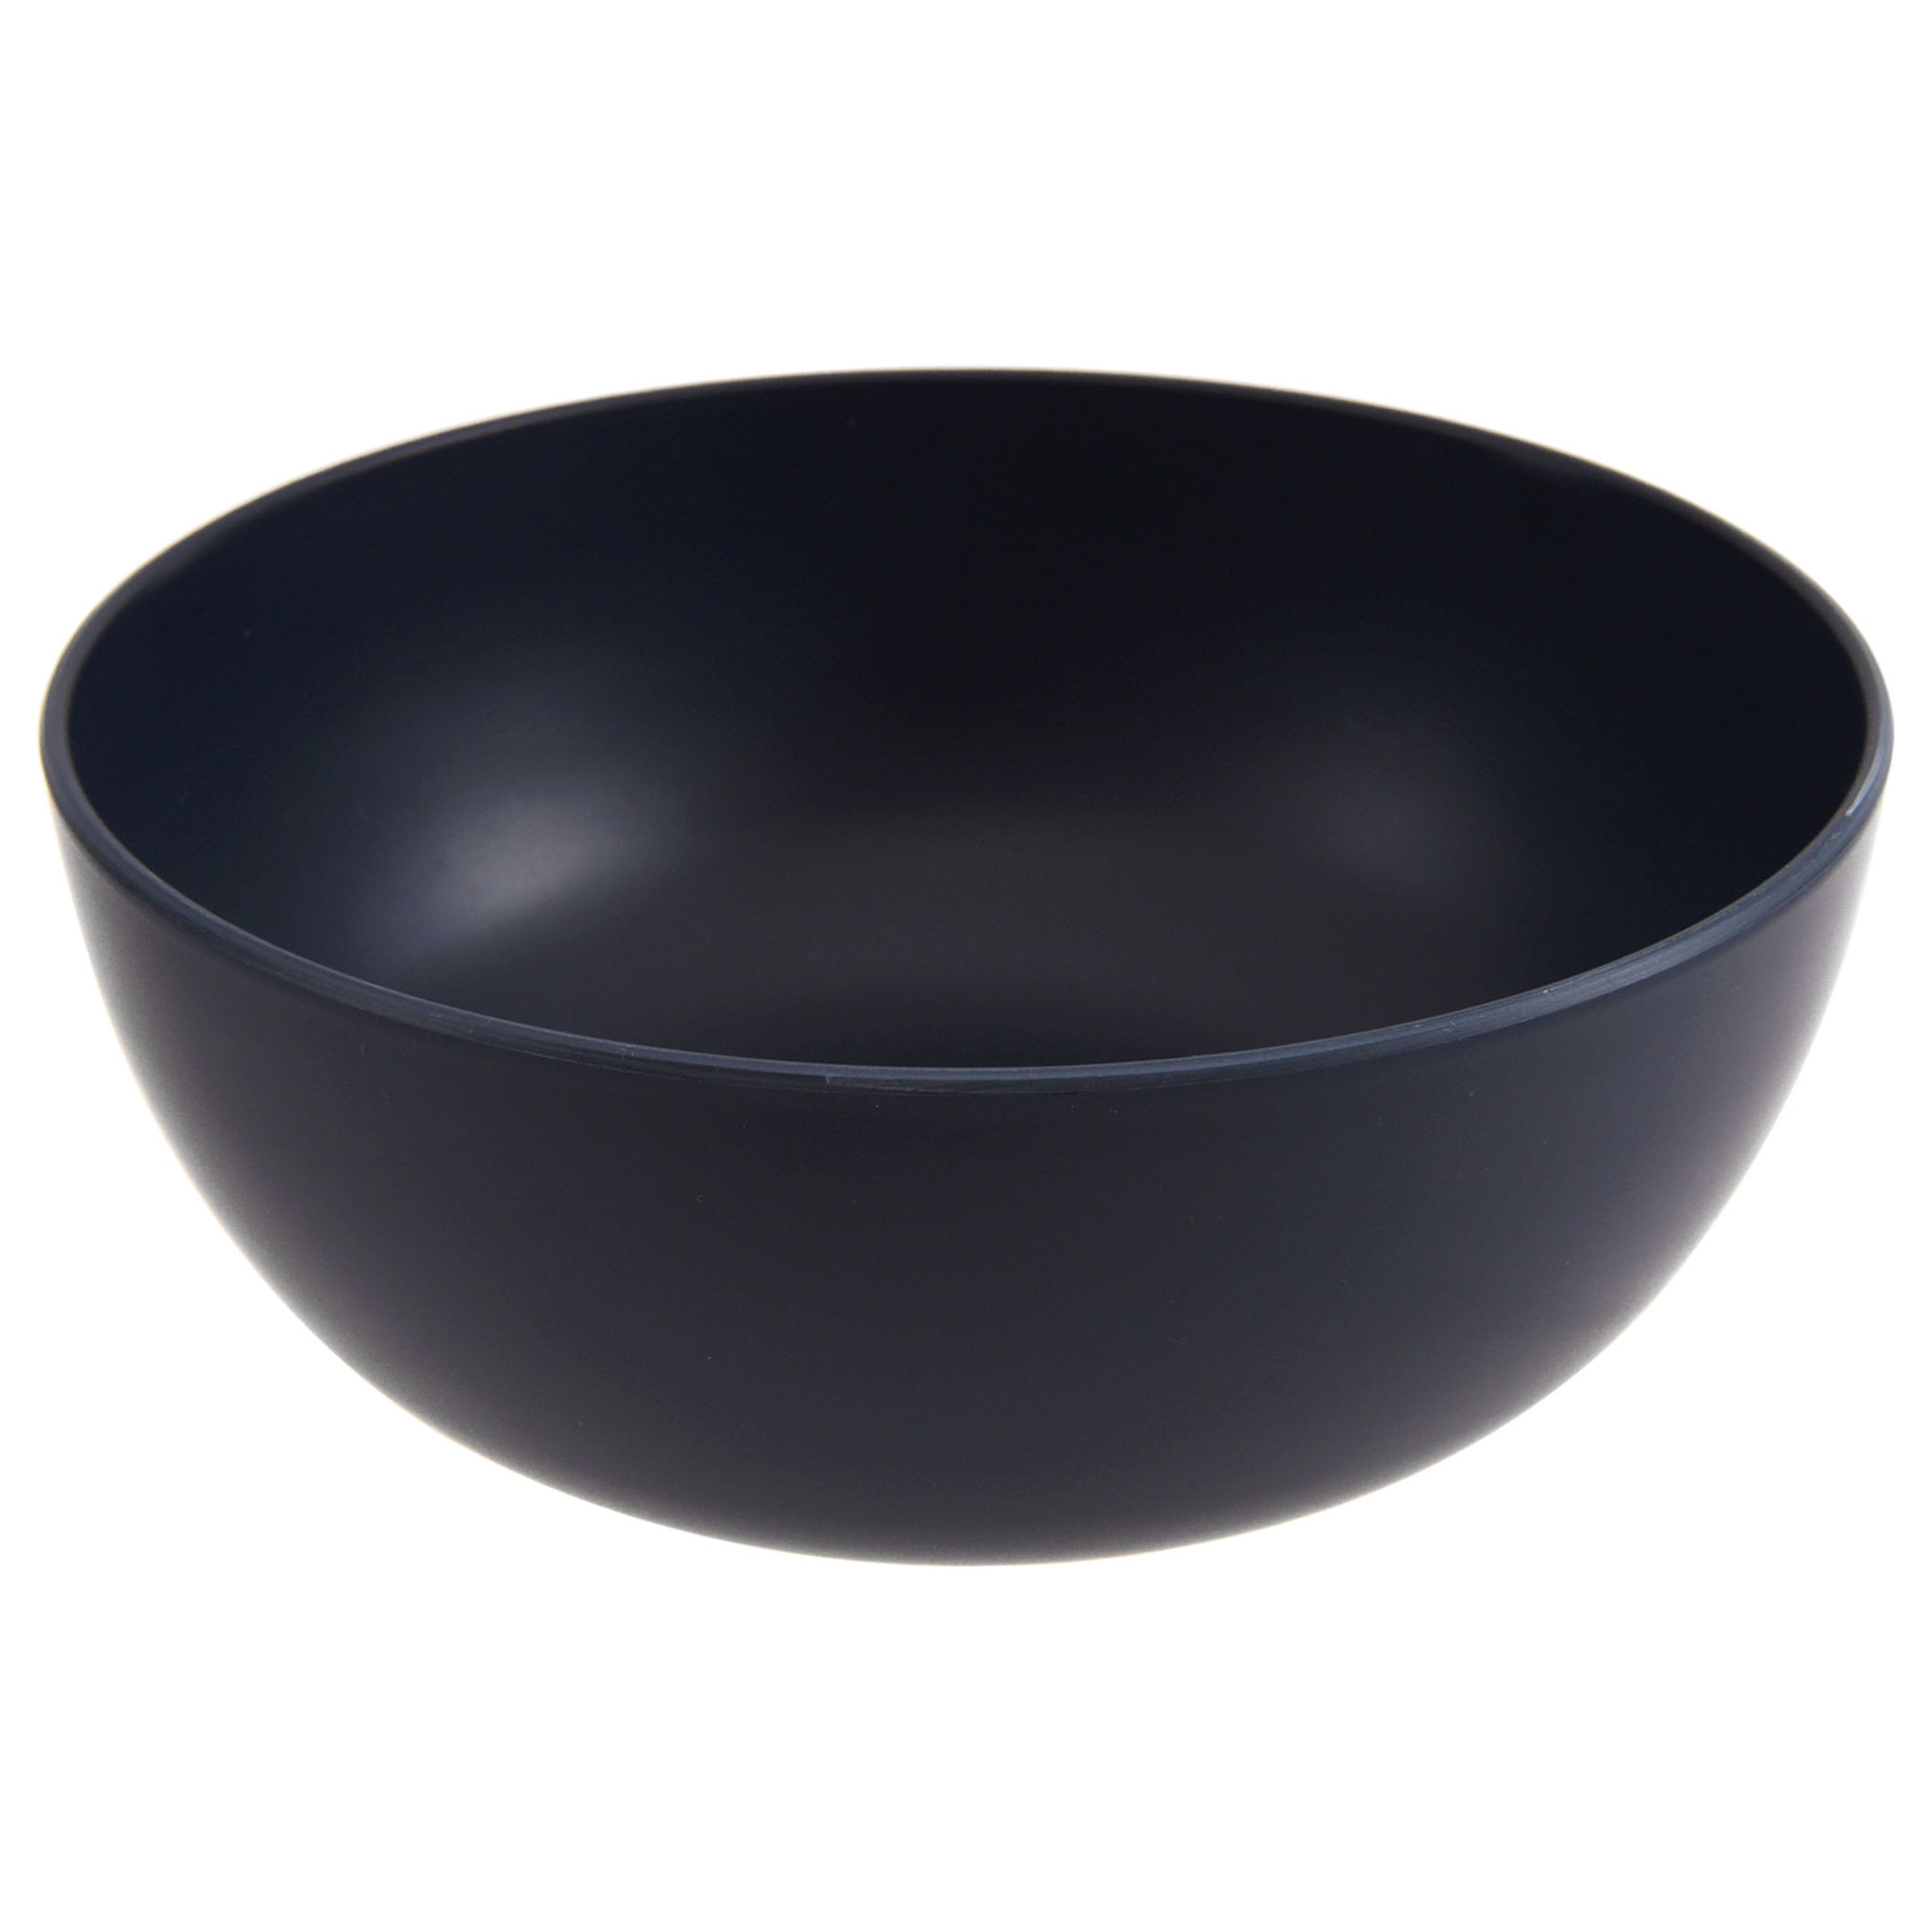 Mainstays - Dark Blue Round Plastic Cereal Bowl, 38-Ounce - image 1 of 4